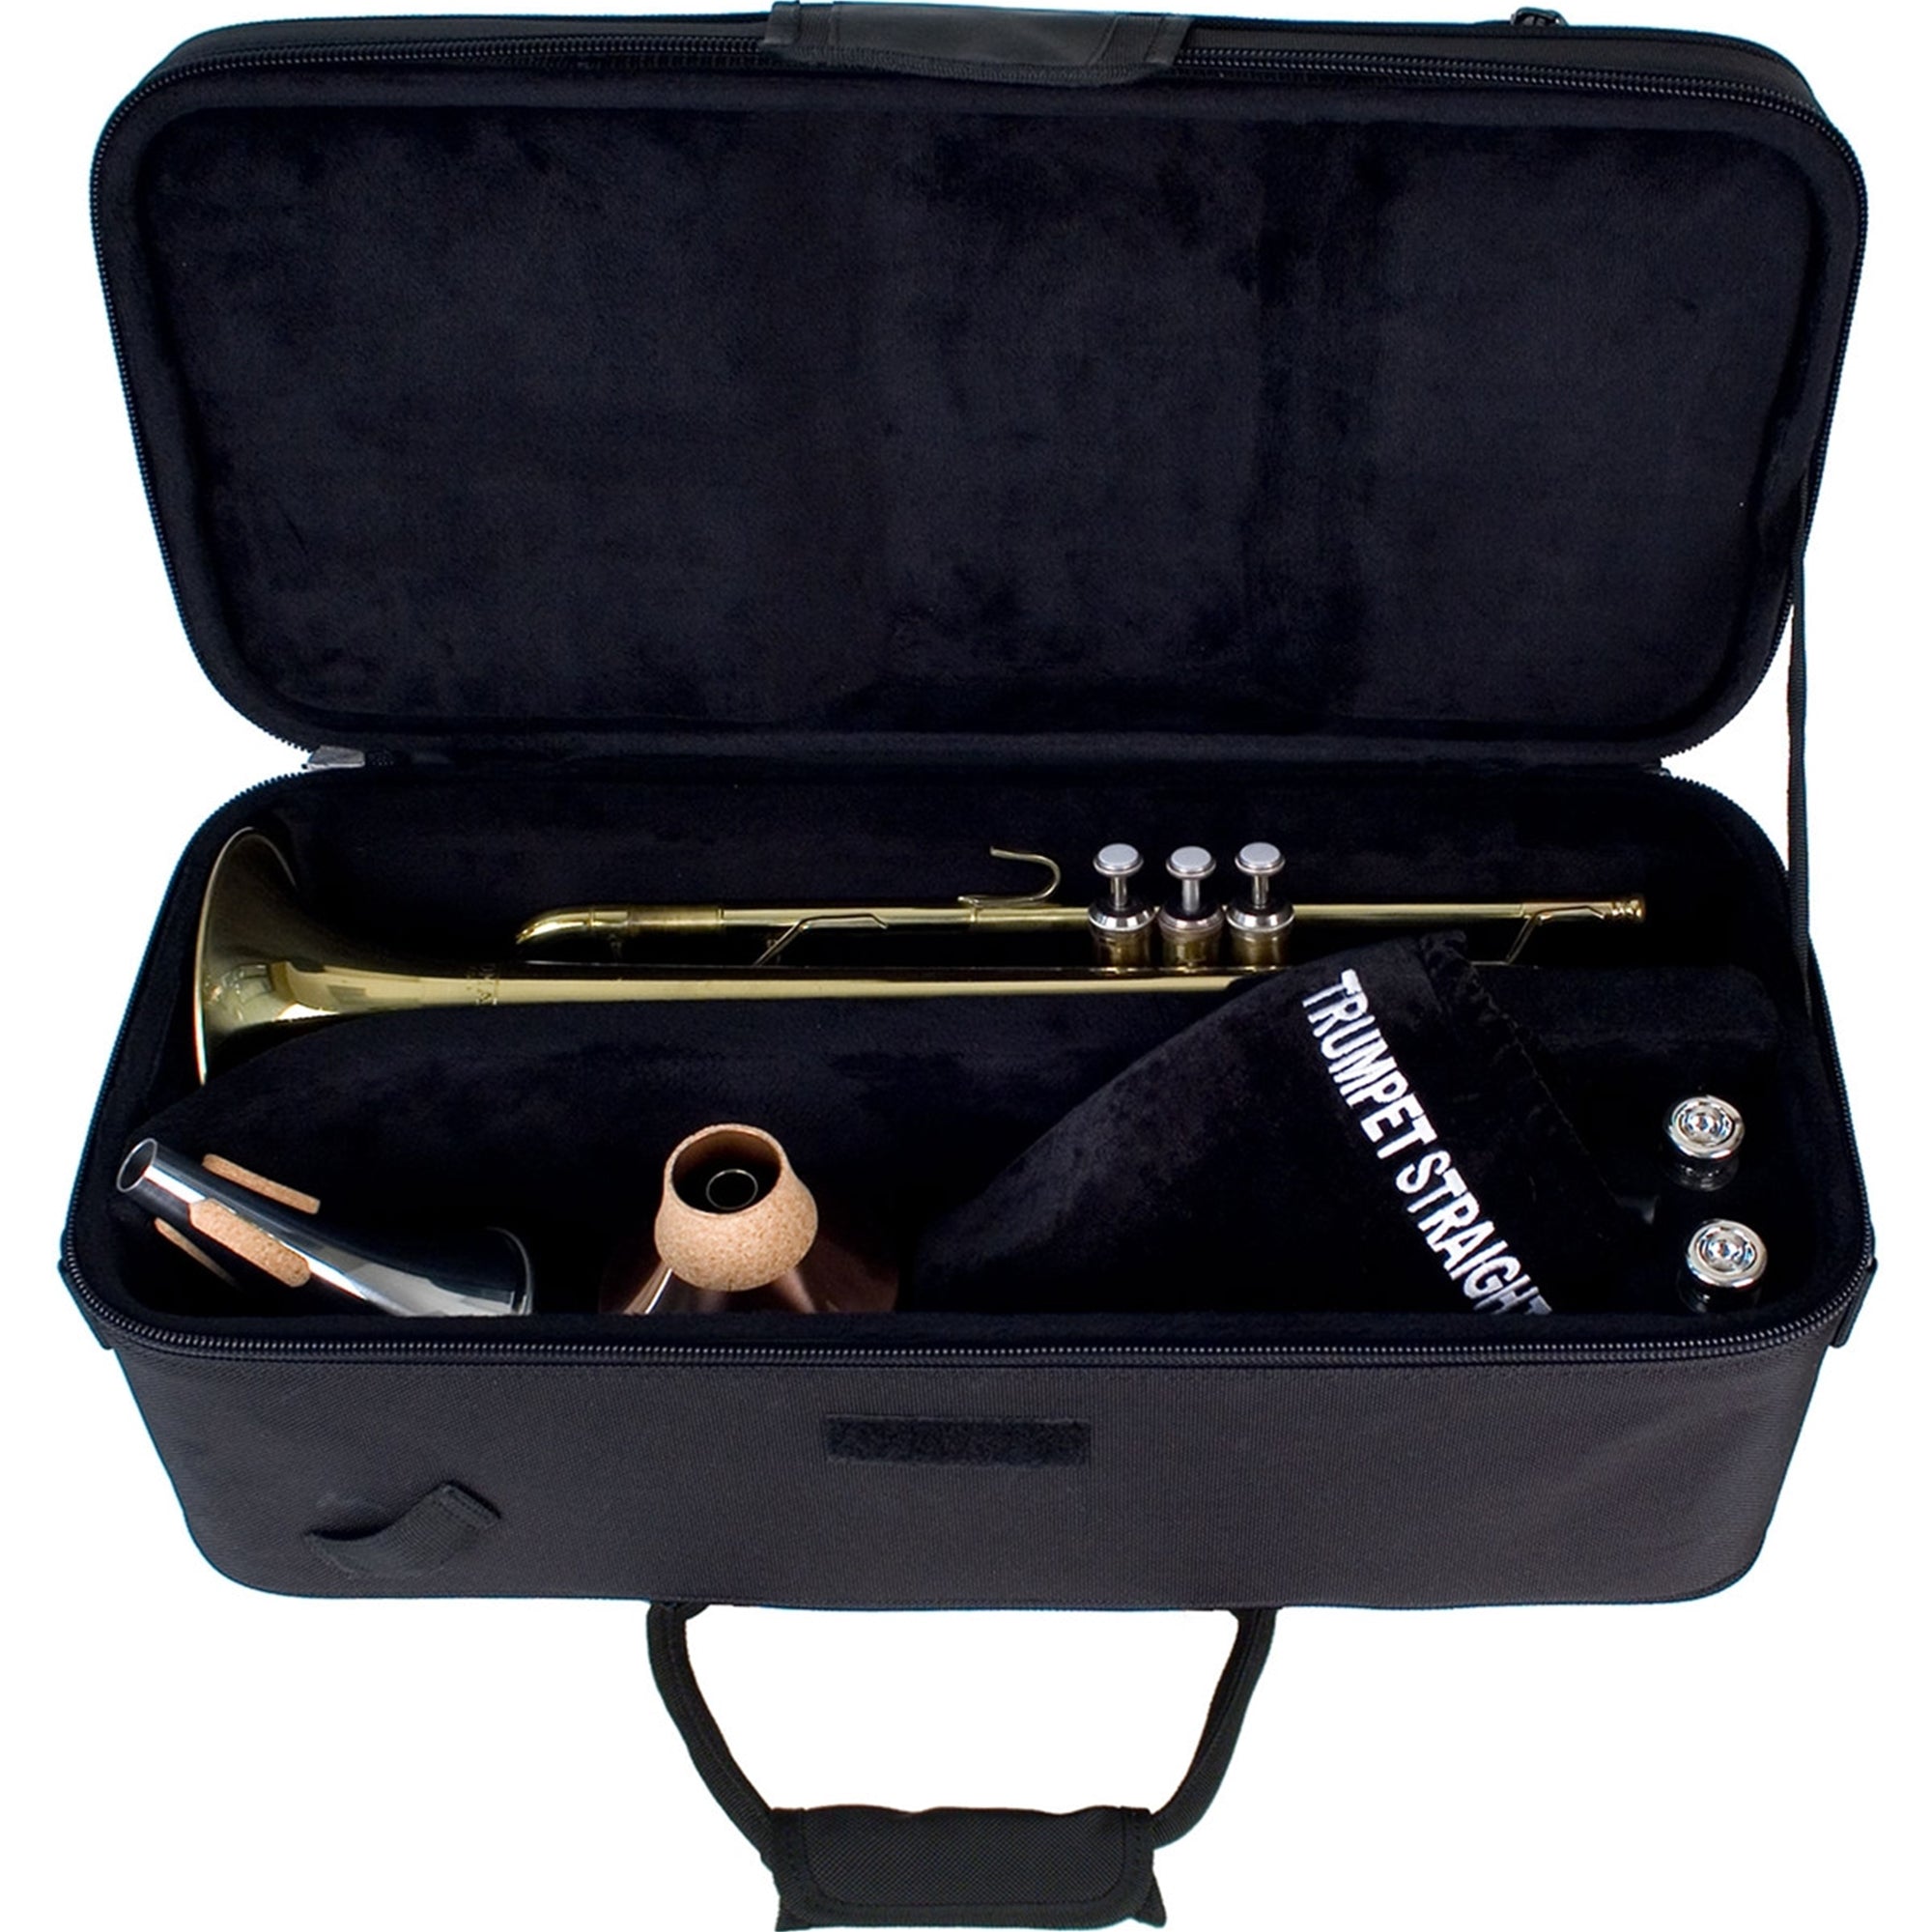 Protec PB301 Trumpet PRO PAC Case - Rectangular with Mute Compartment